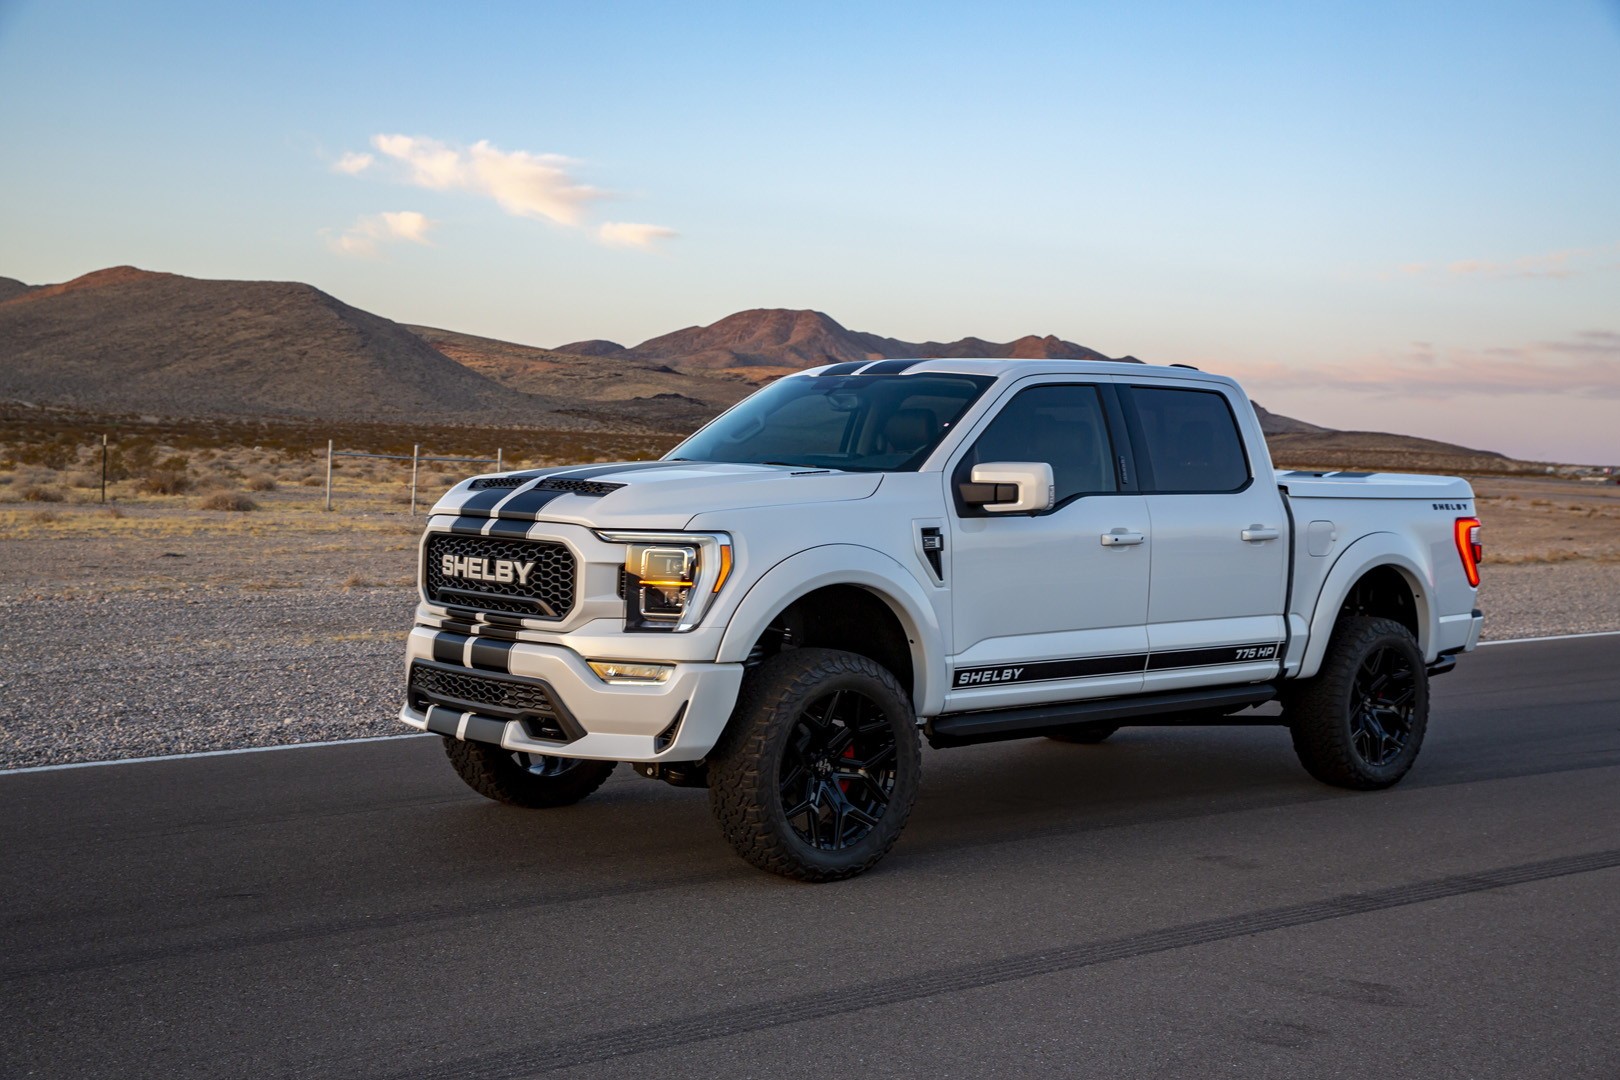 2021 Shelby F150 Has 775 Horsepower, Is Toughest OffRoad Pickup Truck